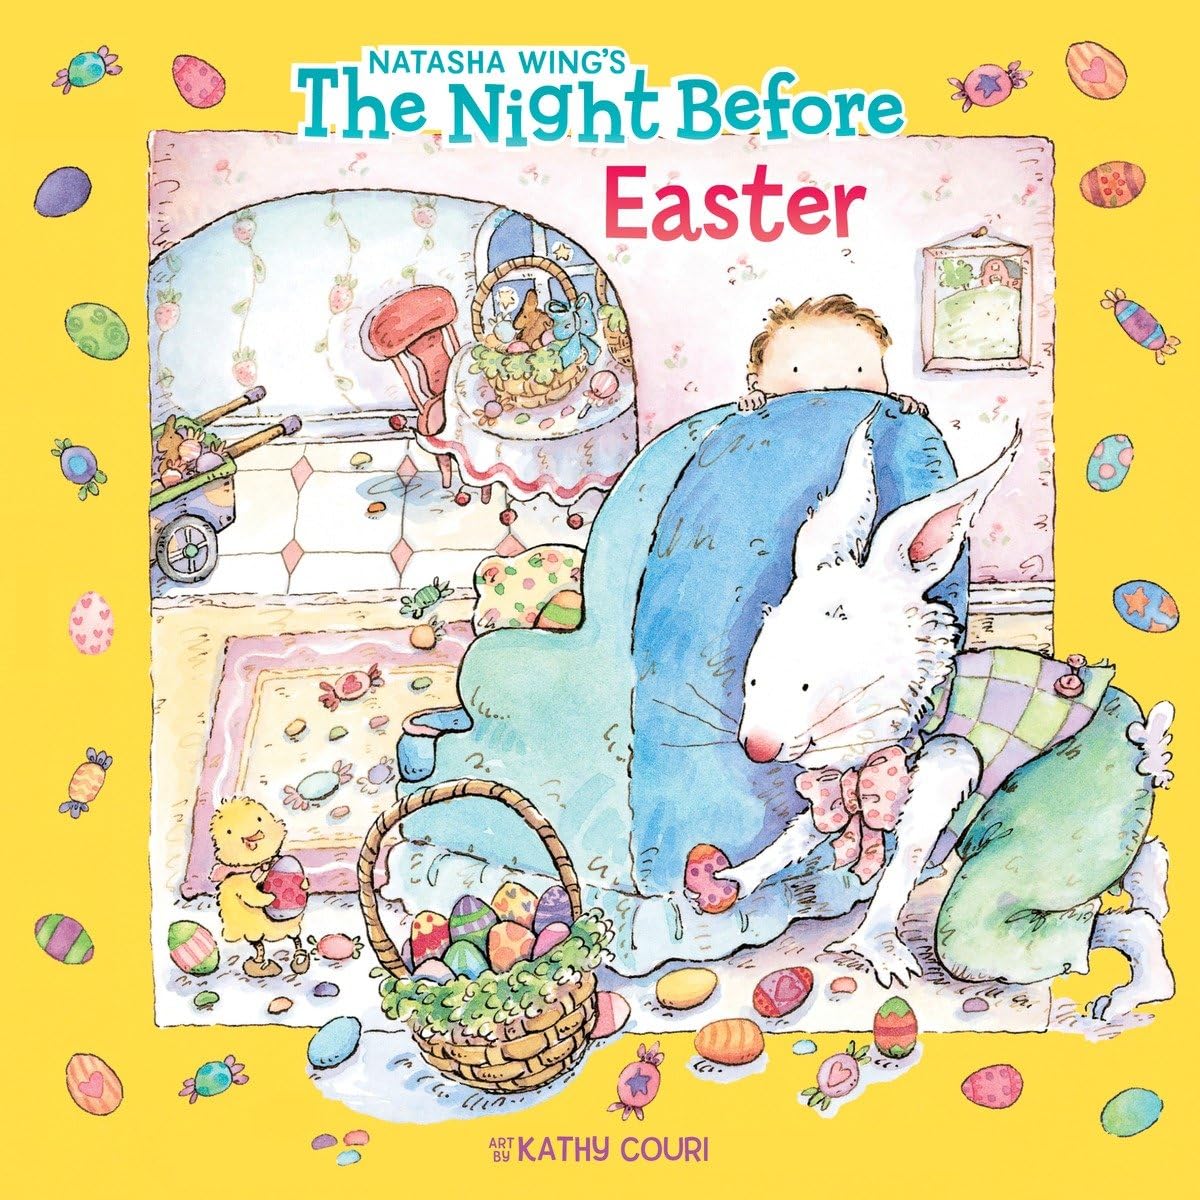 Buy One, Get One 1/2 Off on Kids' Easter Books (Ages 4-8) Peppa Pig's Egg-citing Easter, The Night Before Easter & More from $9.93 + Free Shipping w/ Prime or $35+ orders